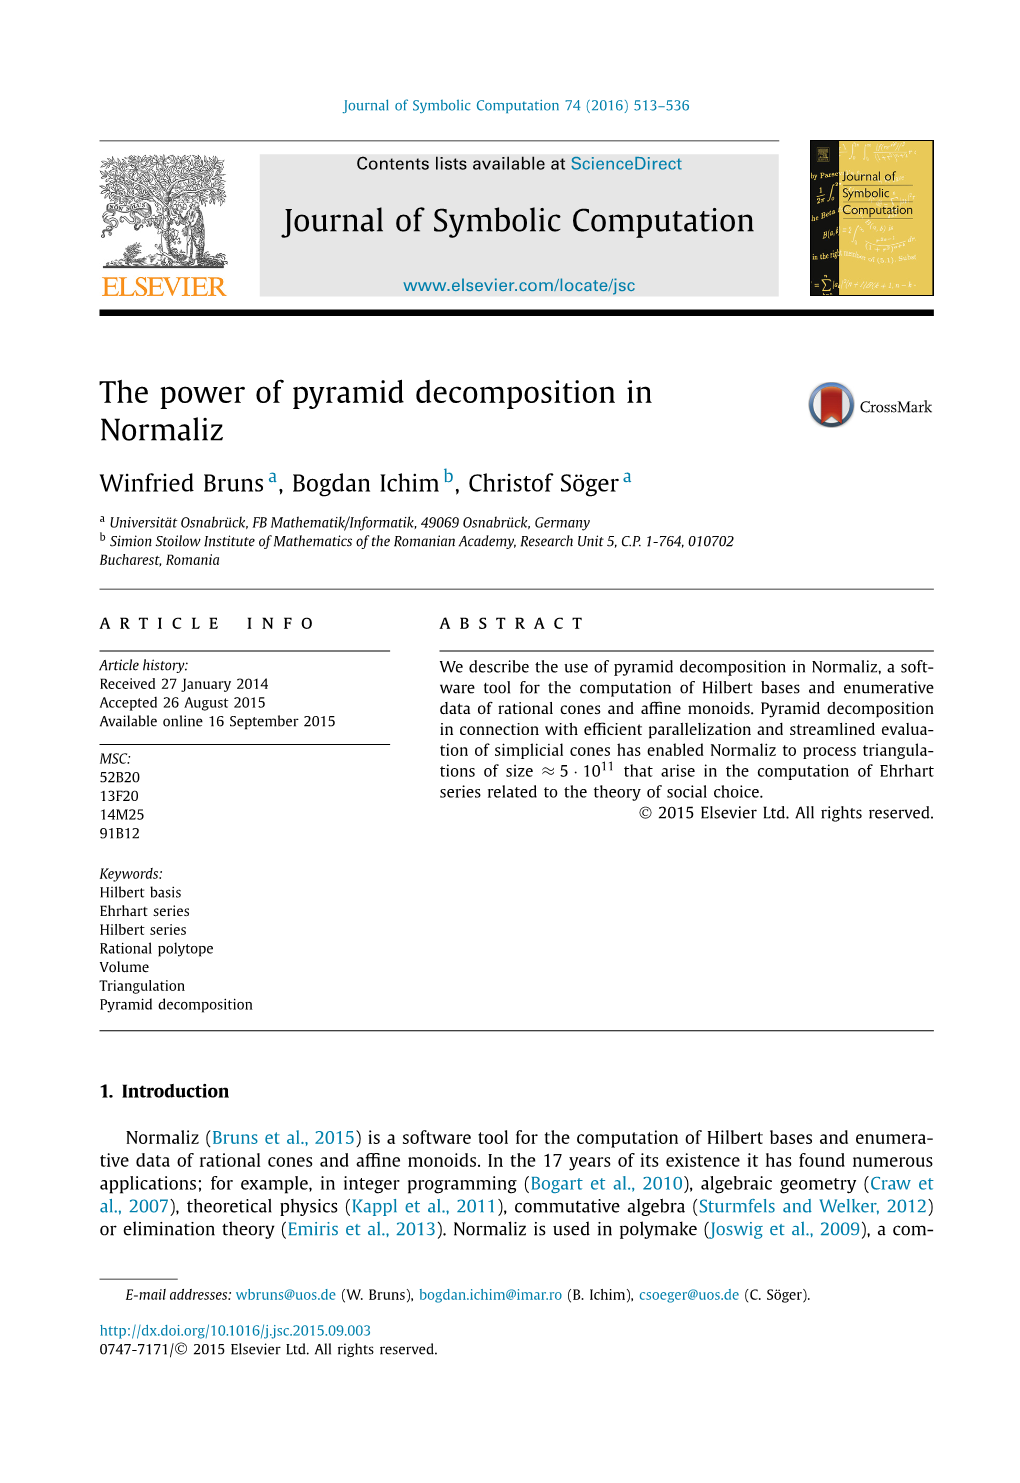 The Power of Pyramid Decomposition in Normaliz